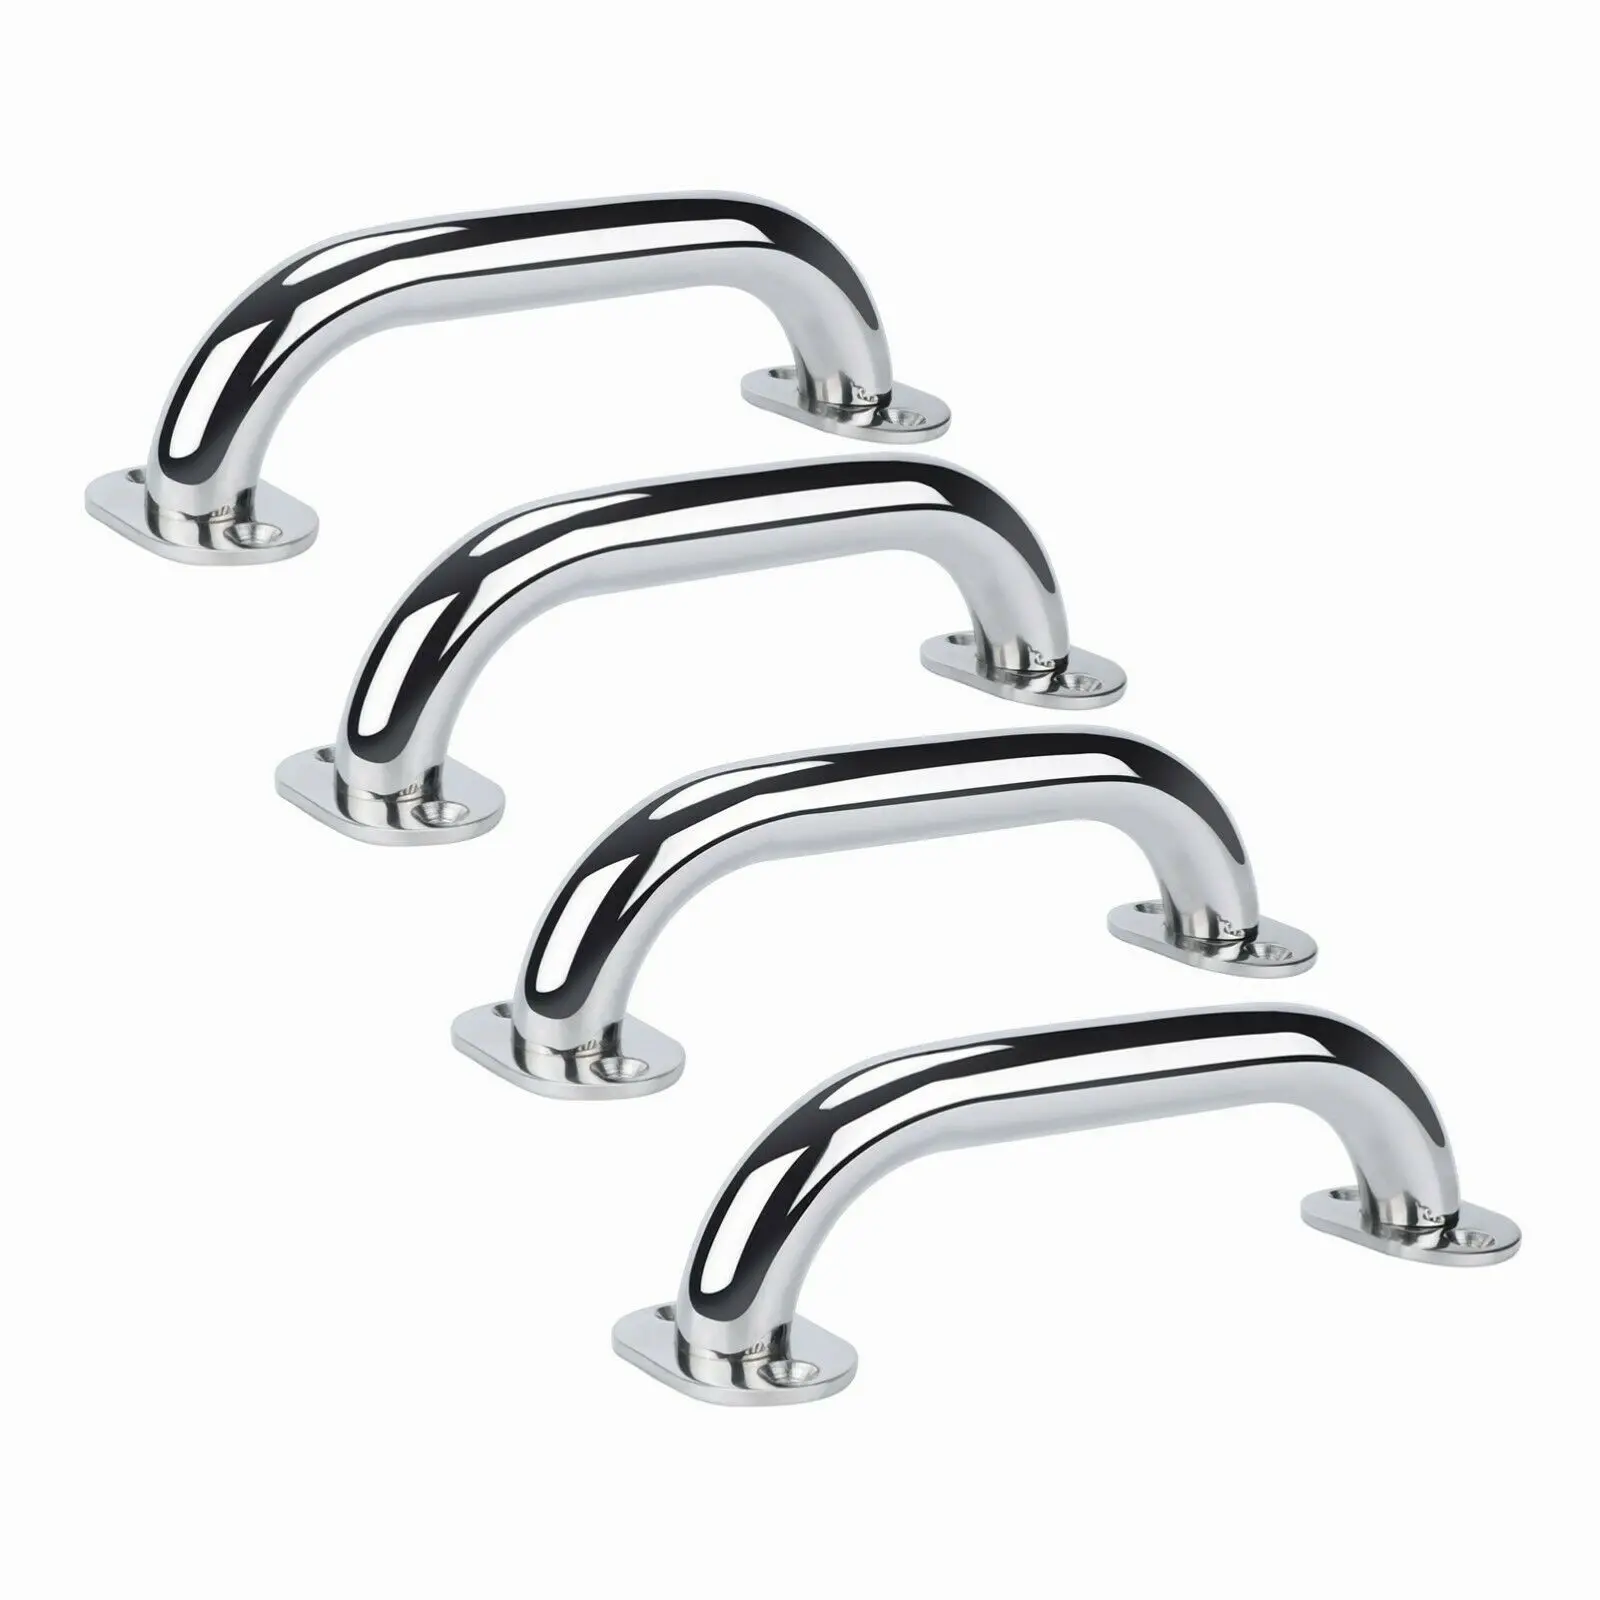 Door Handle 4 Pieces Stainless steel 9'' Boat Polished Boat Marine Grab Handle Handrail Boat Accessories boat 304 stainless steel polished cleat door grab rail 8 200mm handle handrail for marine accessoies